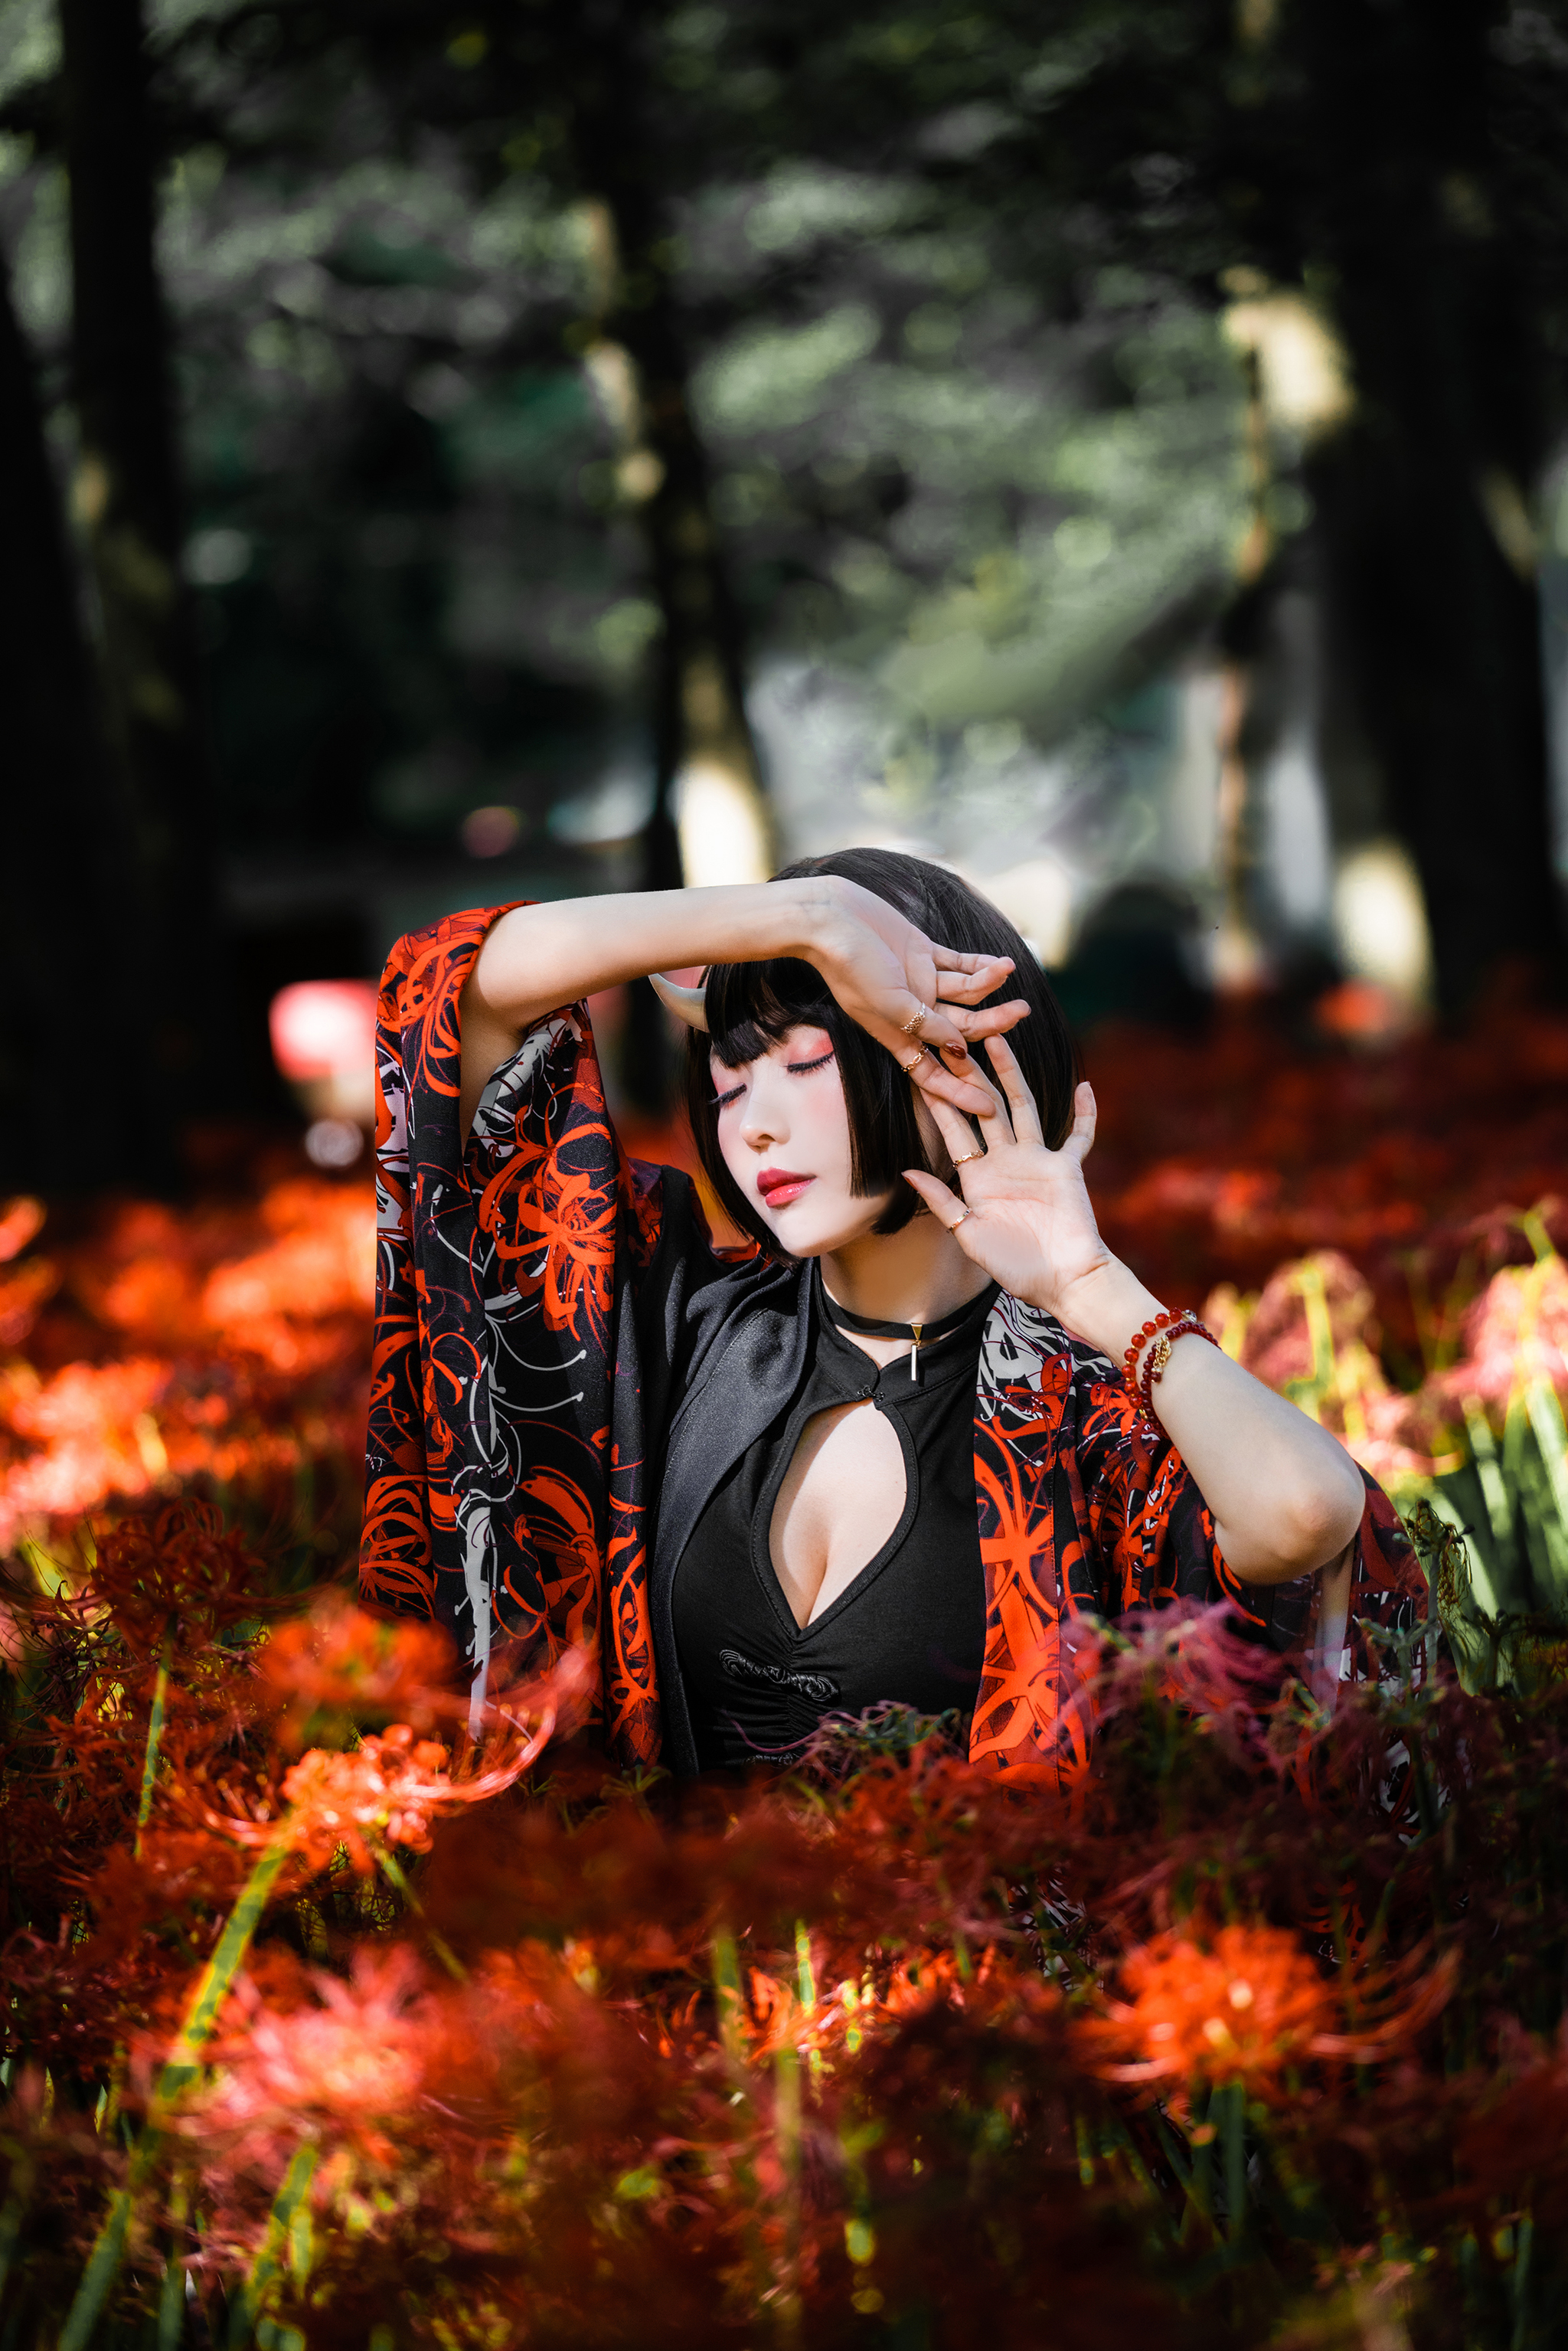 Ely Asian Higanbana Spider Lilies Flowers Horns Kimono Forest Trees Closed Eyes Bracelets 2048x3070